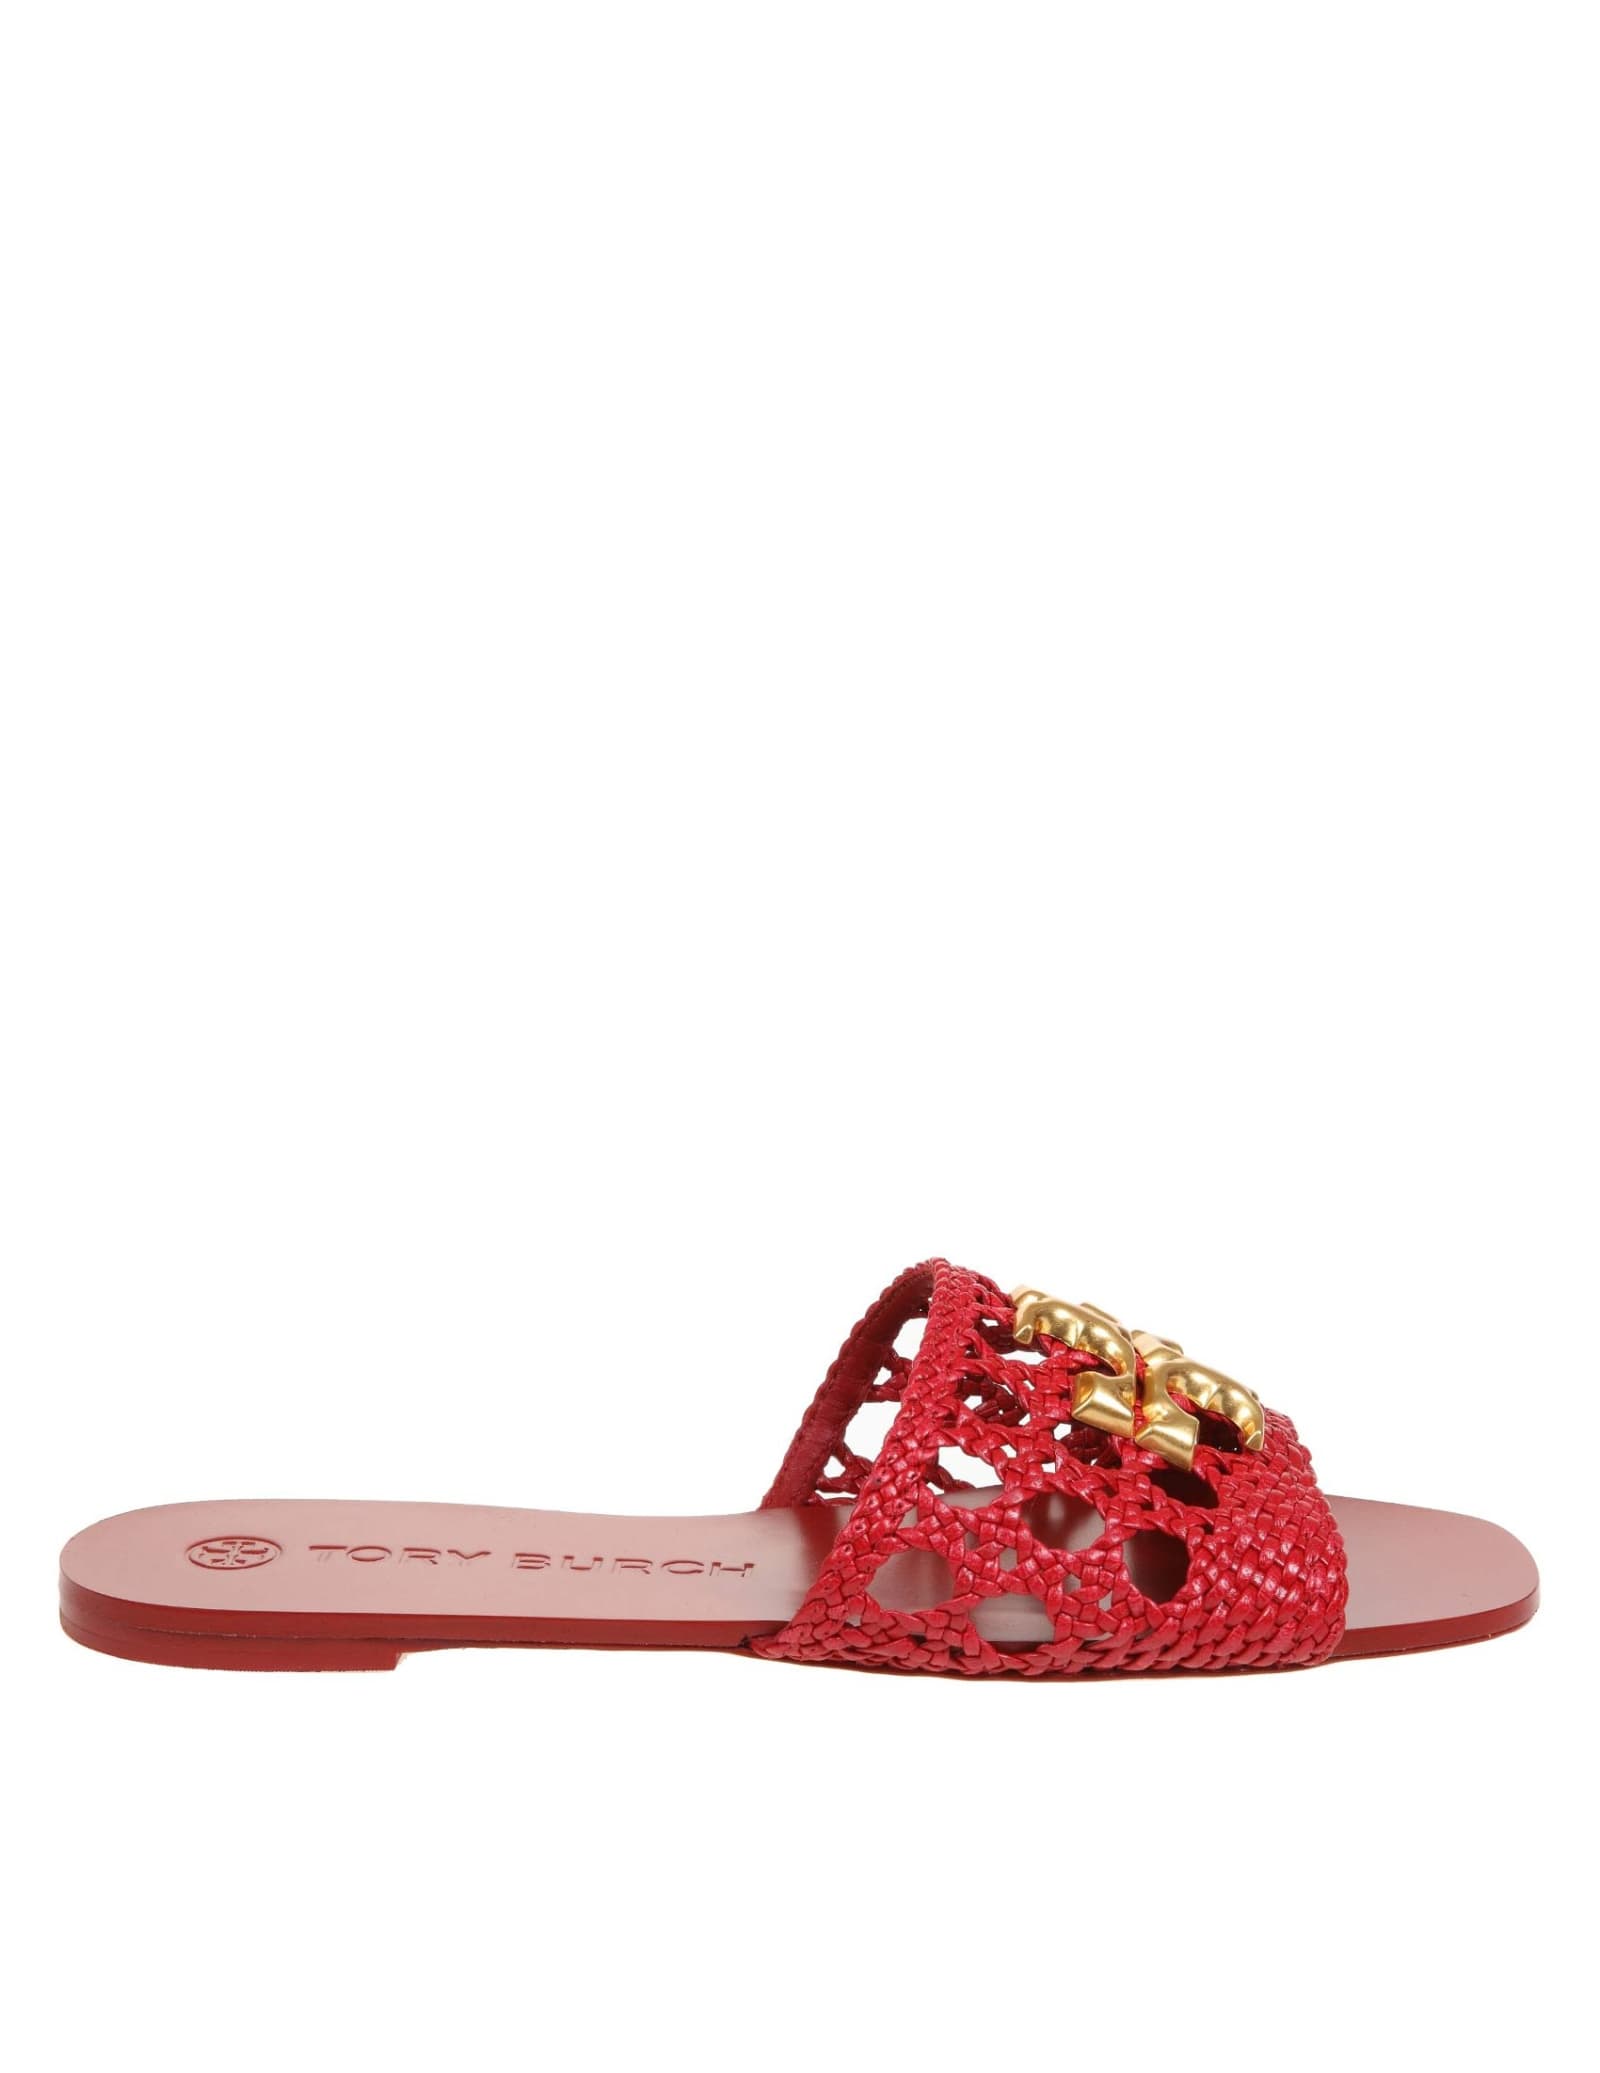 Tory Burch Mules Eleanor In Red Woven Leather